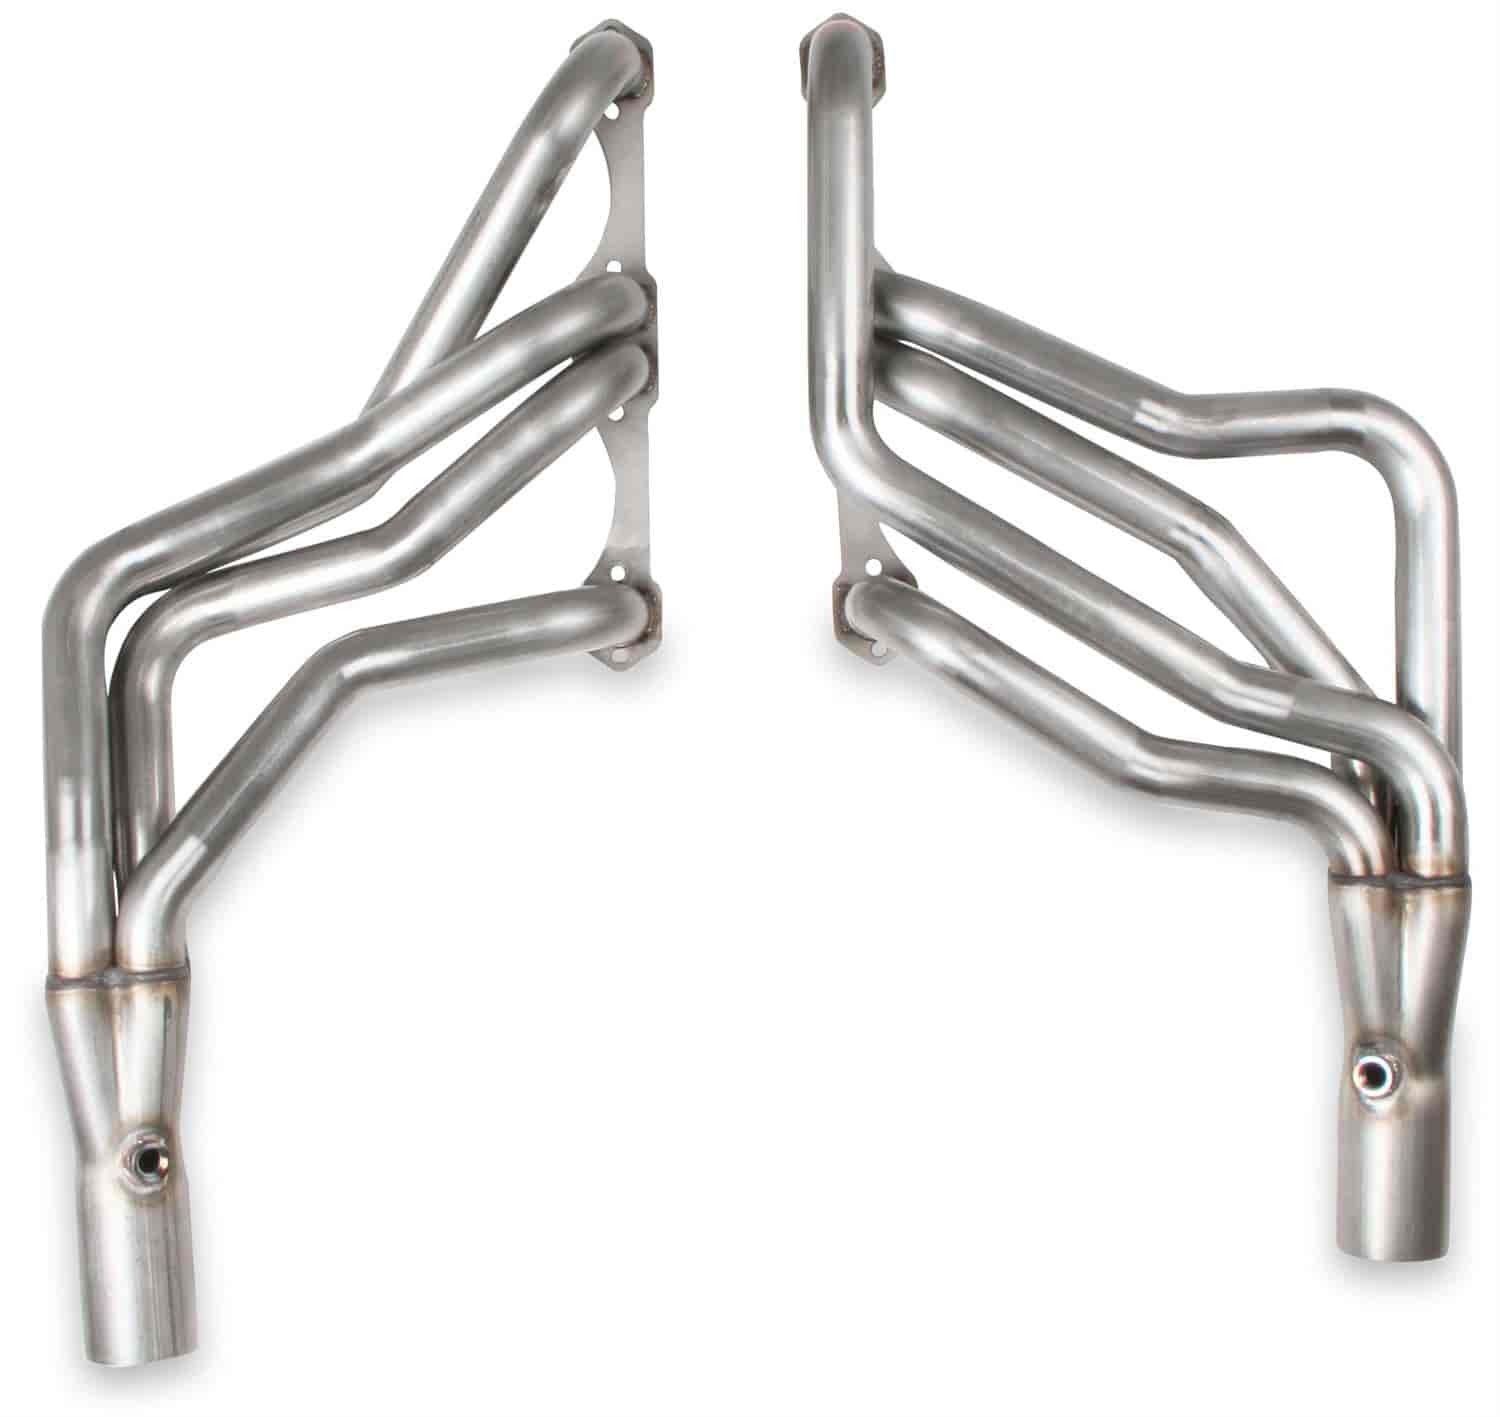 Blackheart Long-Tube Headers 1978-1988 GM G-Body with Small Block Chevy Gen-1 Engine - Natural Finish